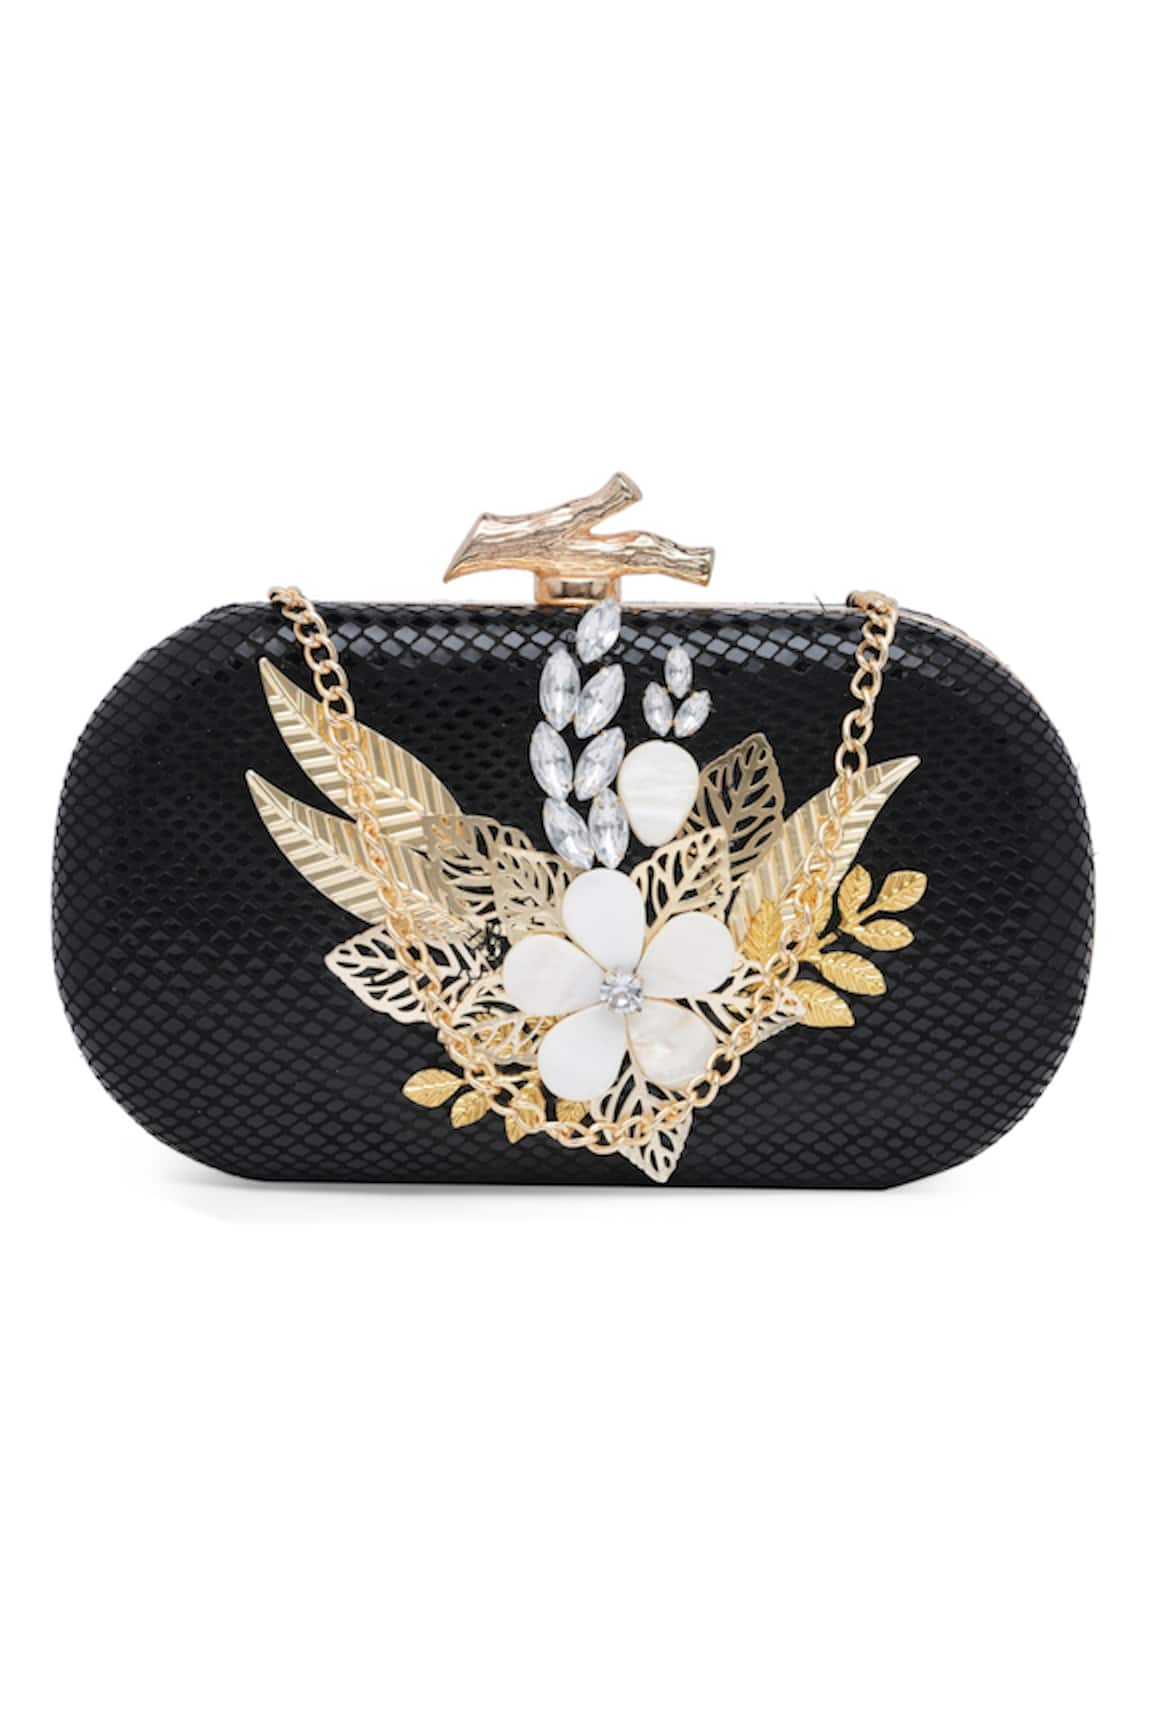 Richa Gupta Leather Embellished Clutch With Sling